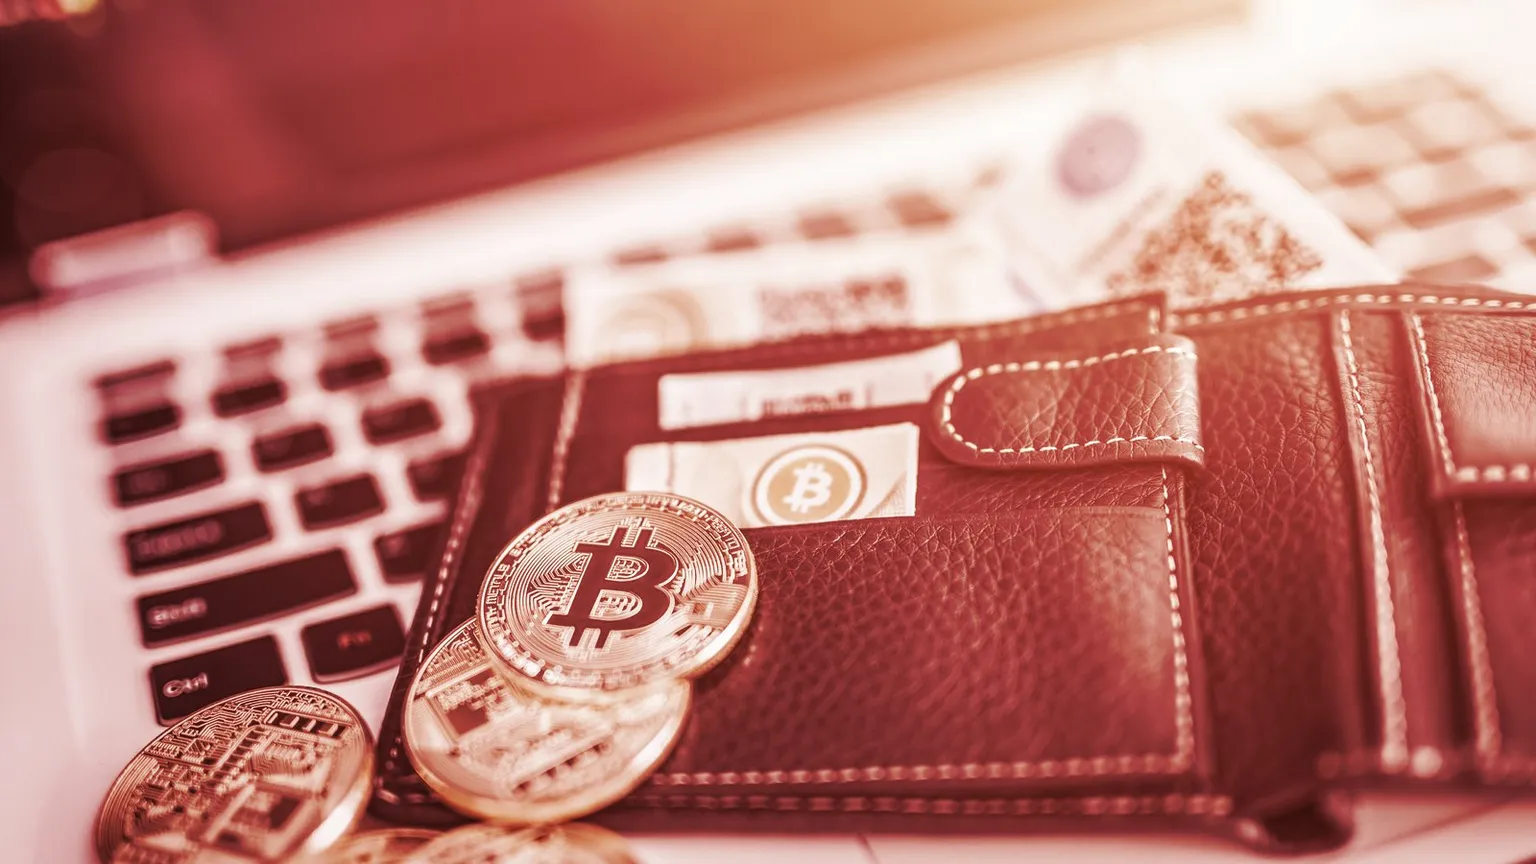 Exodus wants to sell company shares inside its Bitcoin wallet. Image: Shutterstock